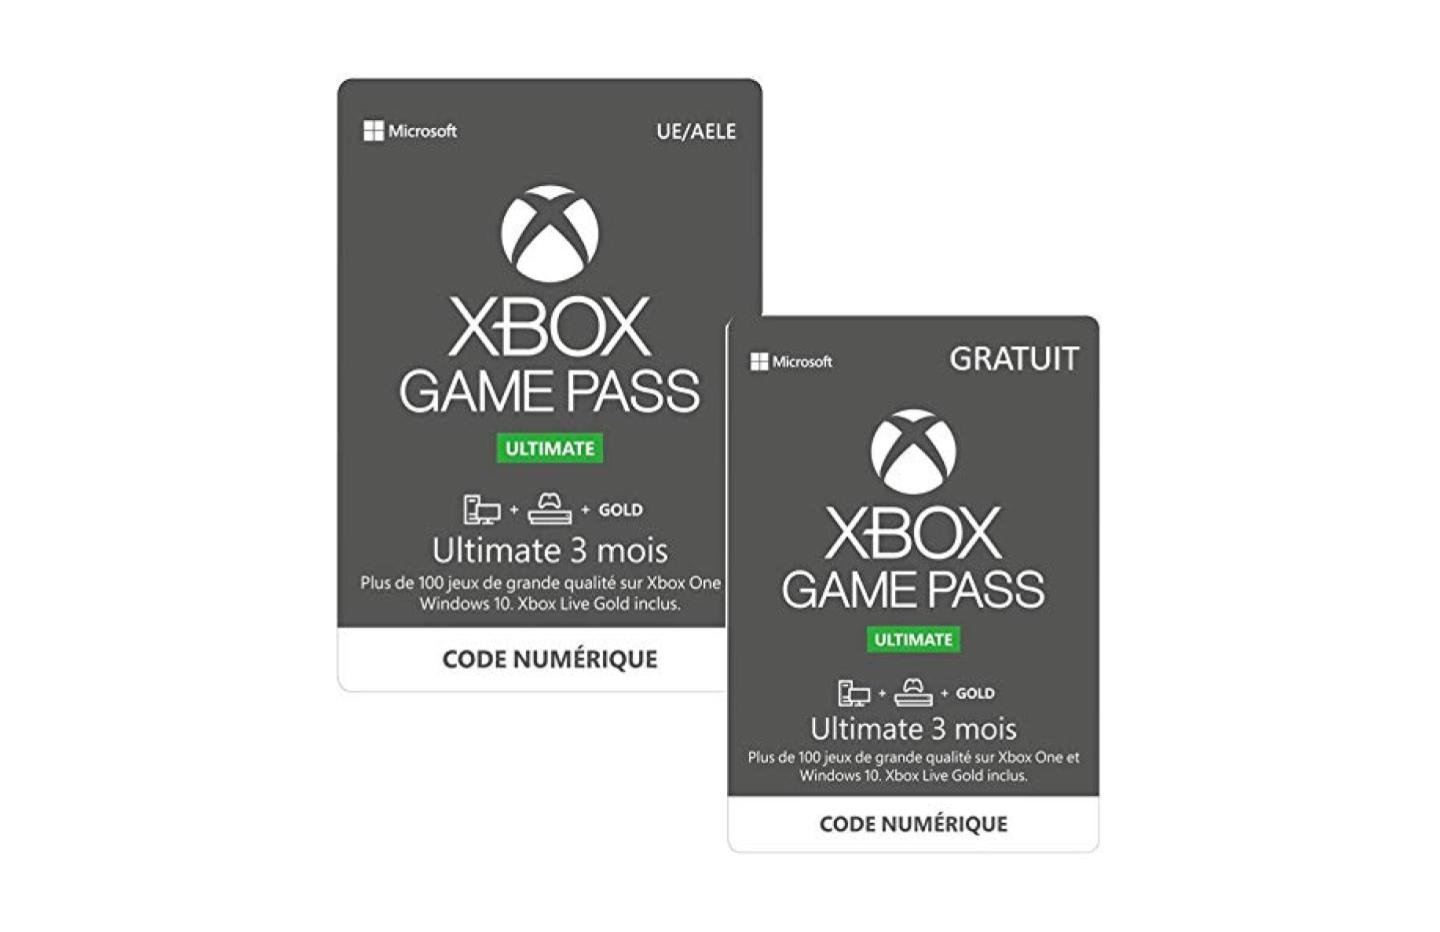 how much is 1 year of xbox game pass ultimate